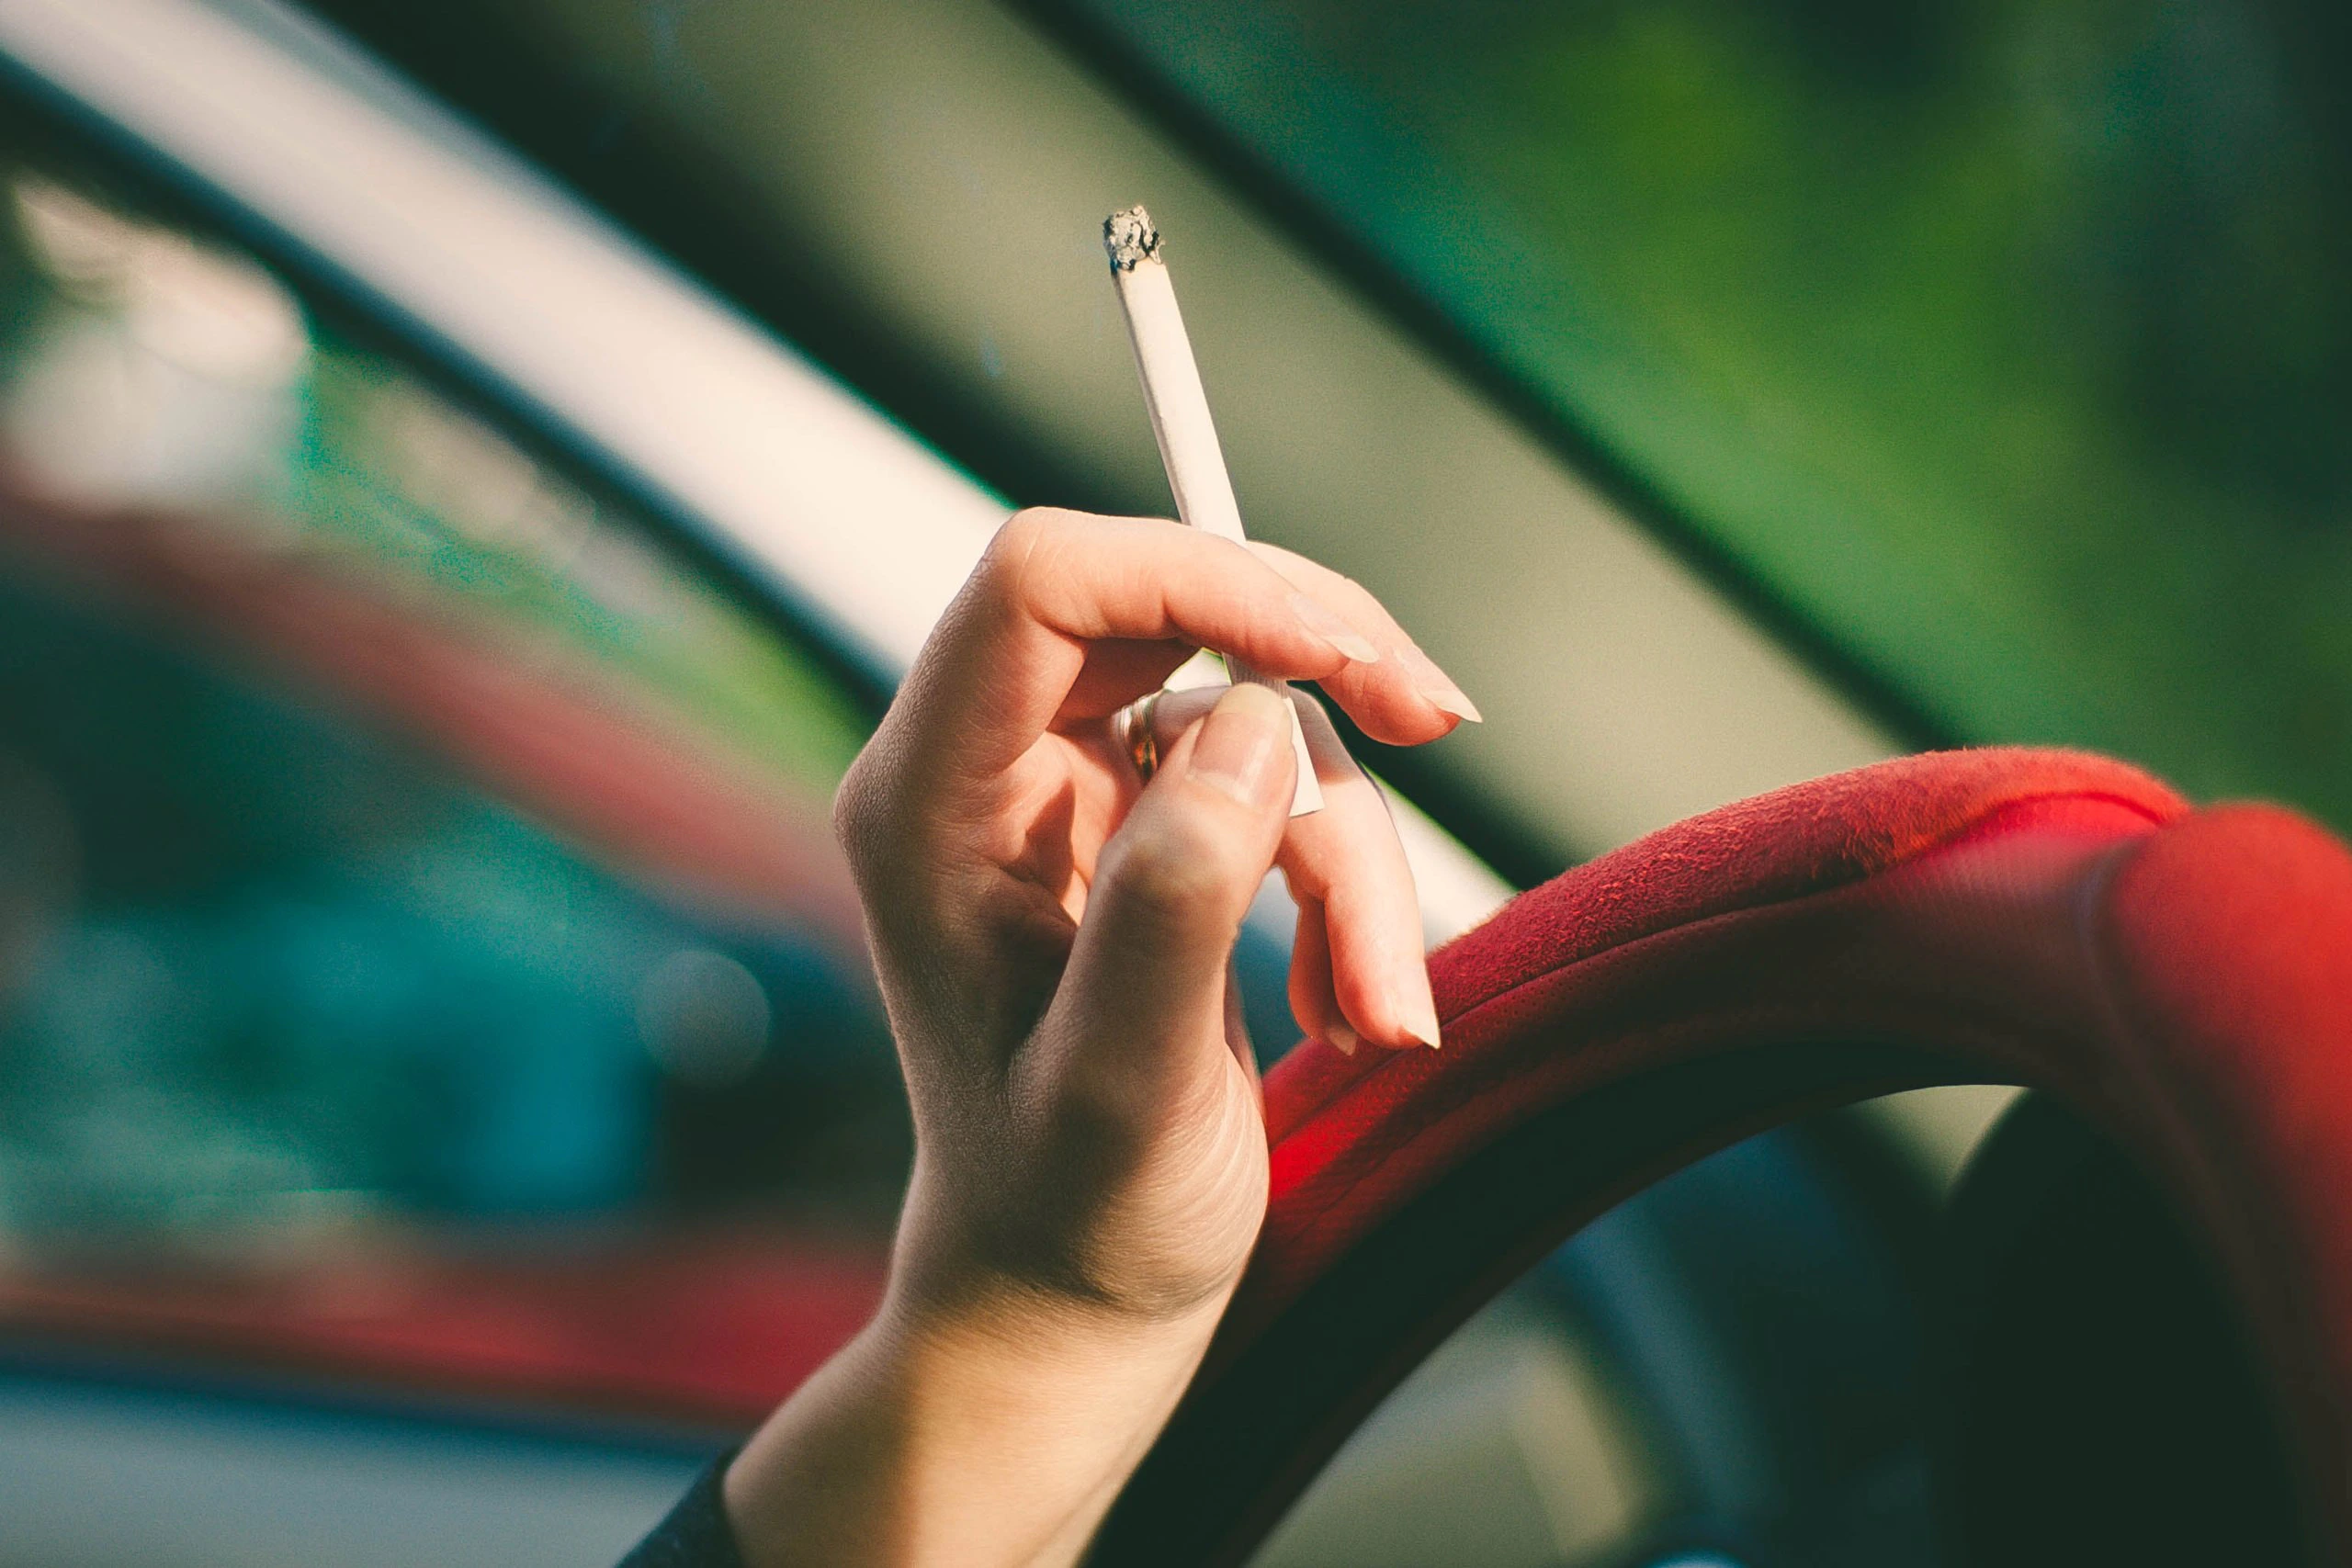 woman smoking a cigarette in the car